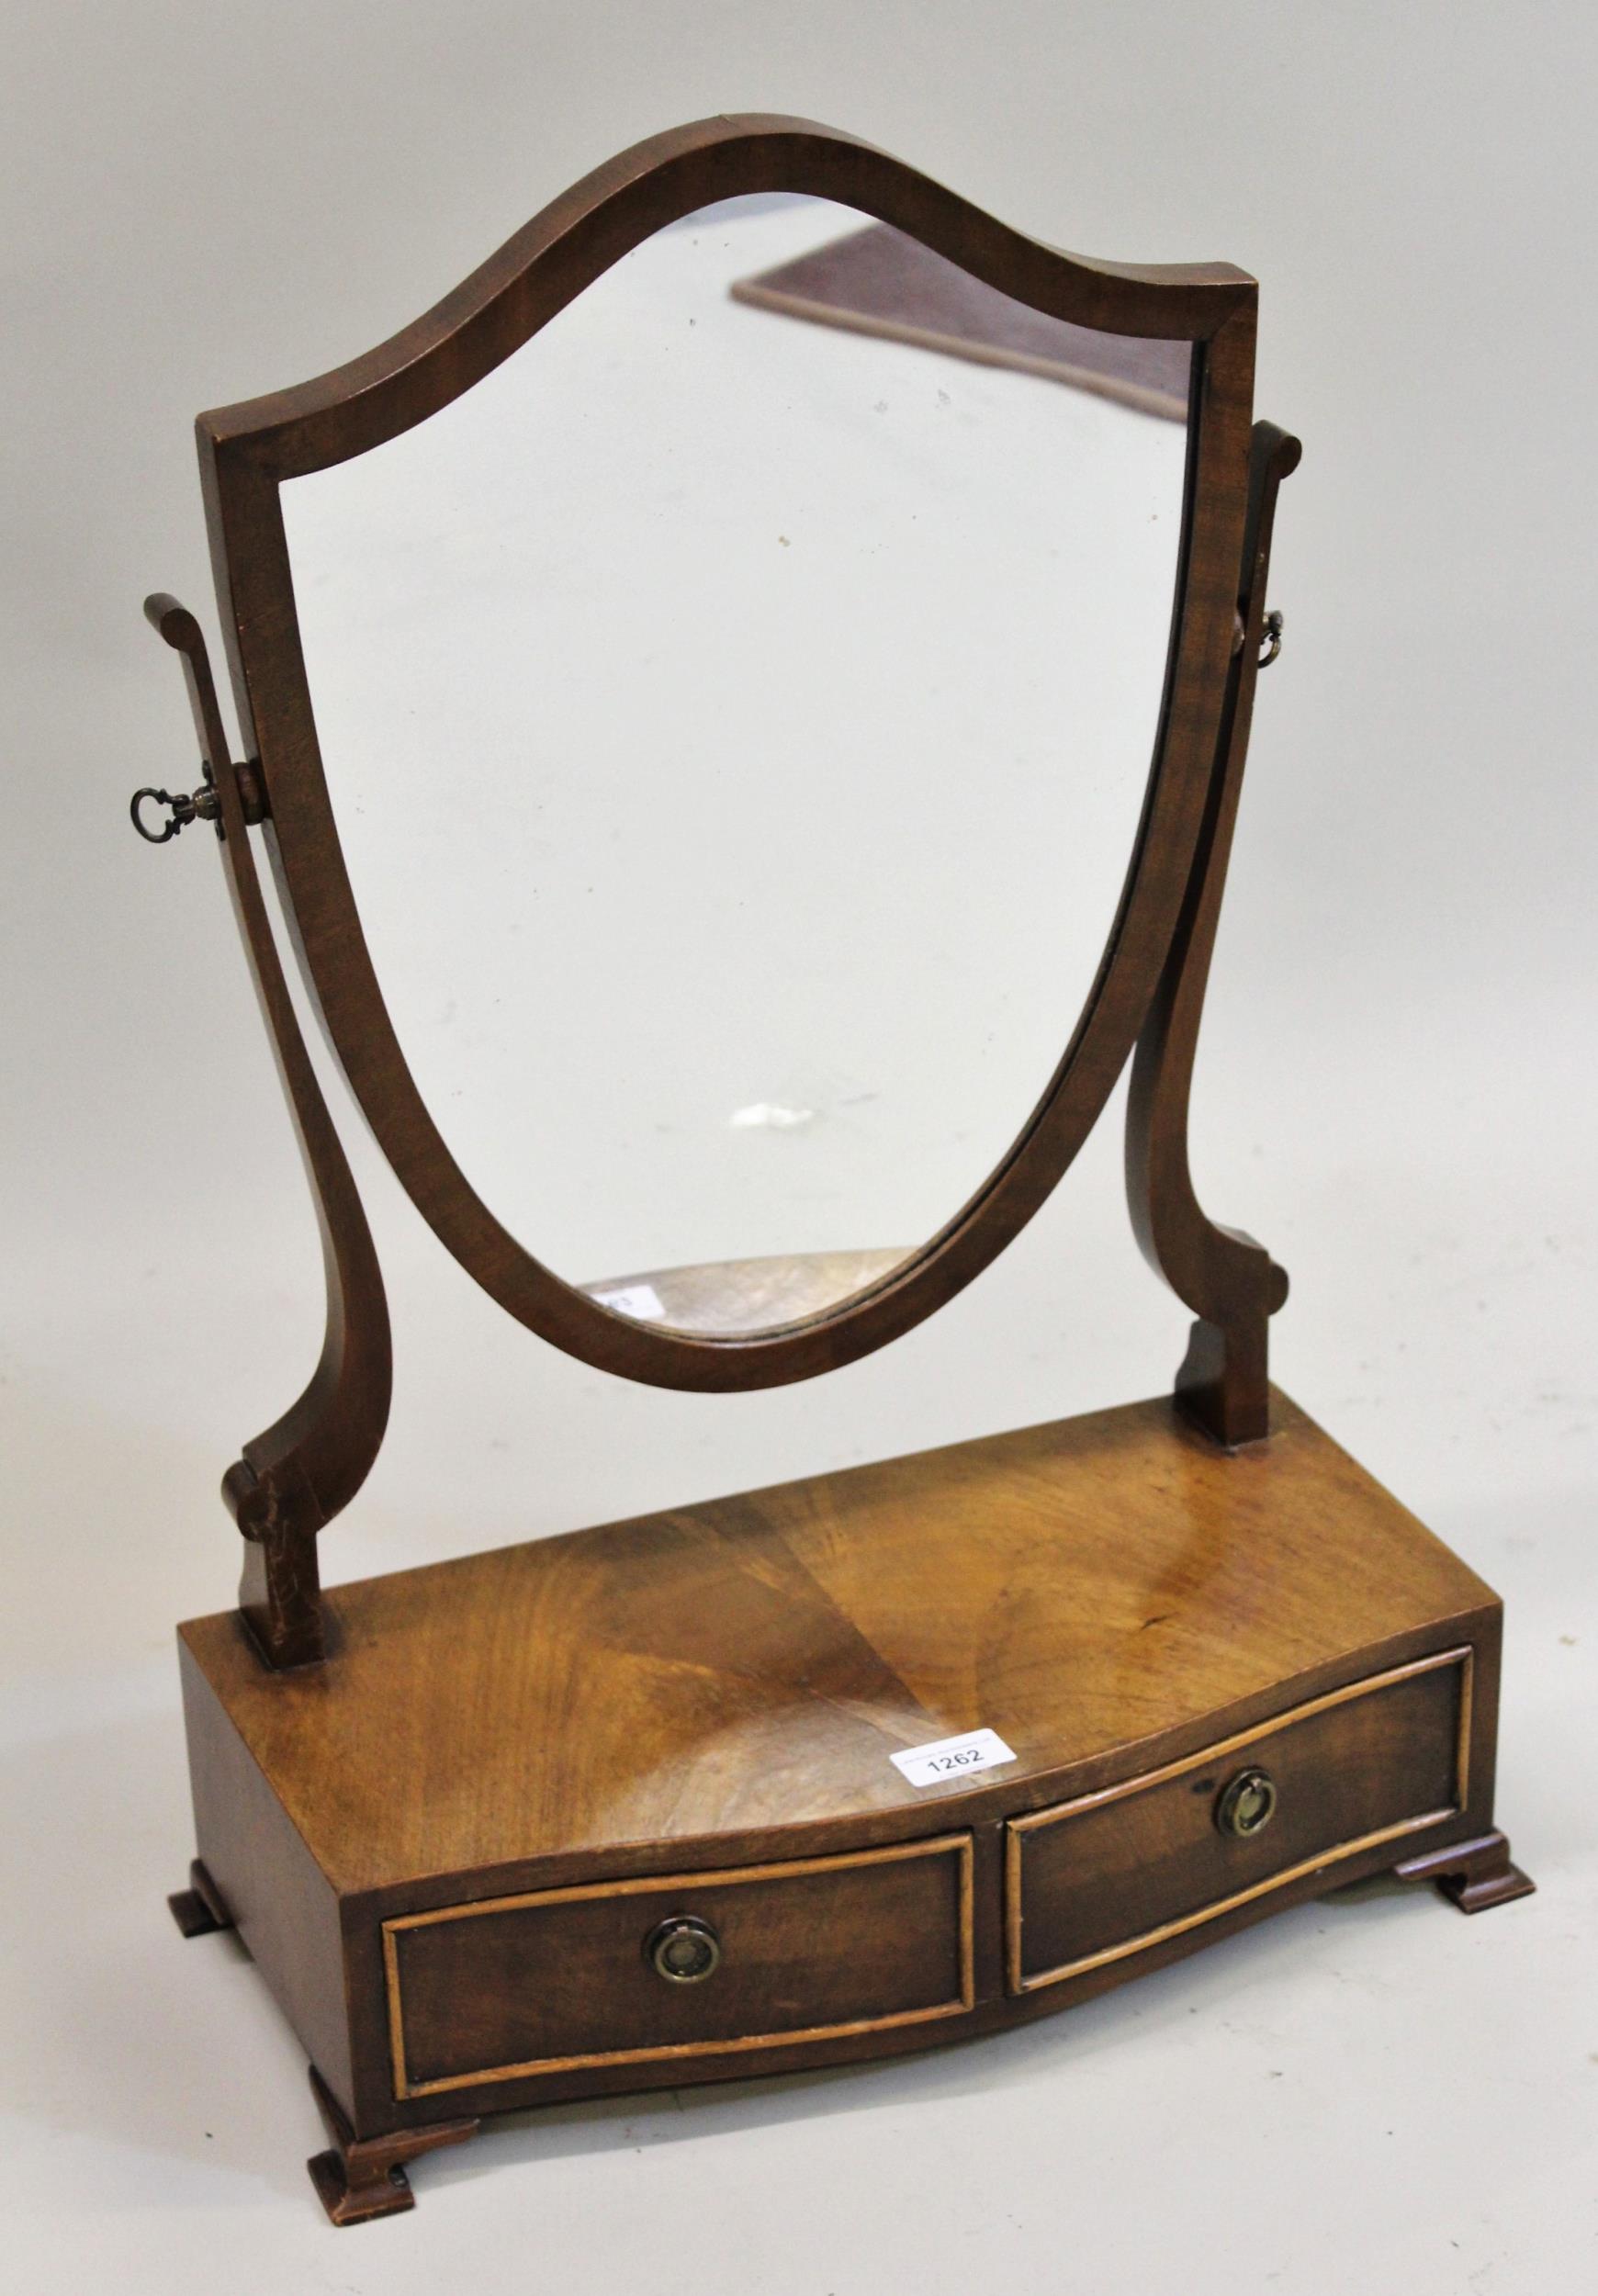 Reproduction mahogany shield shaped swing frame box toilet mirror with two drawer base